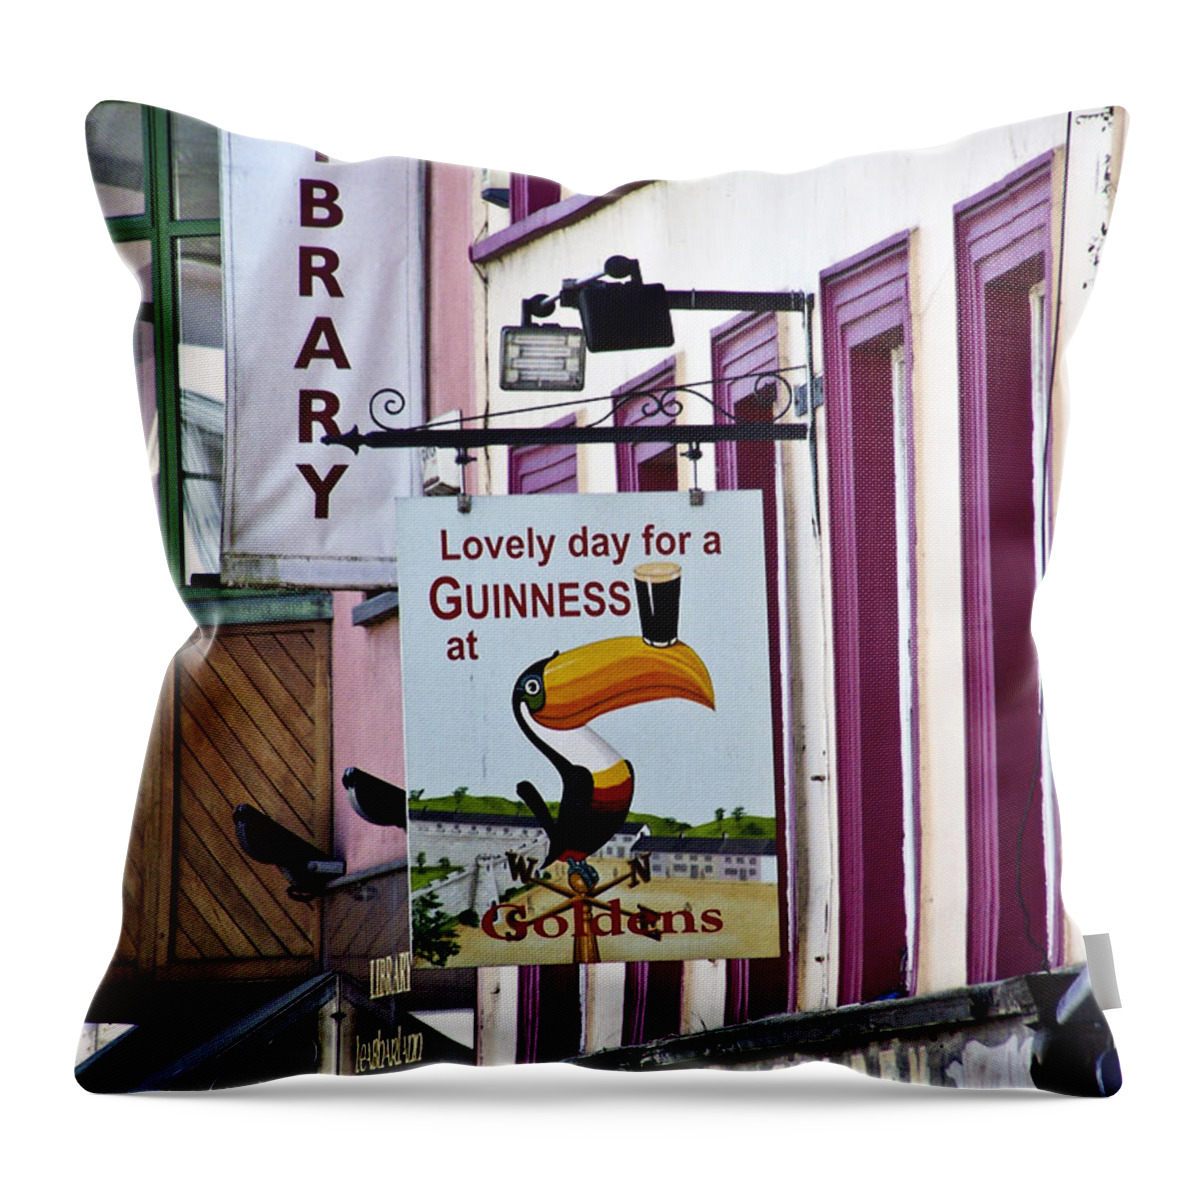 Irish Throw Pillow featuring the photograph Lovely Day for a Guinness Macroom Ireland by Teresa Mucha